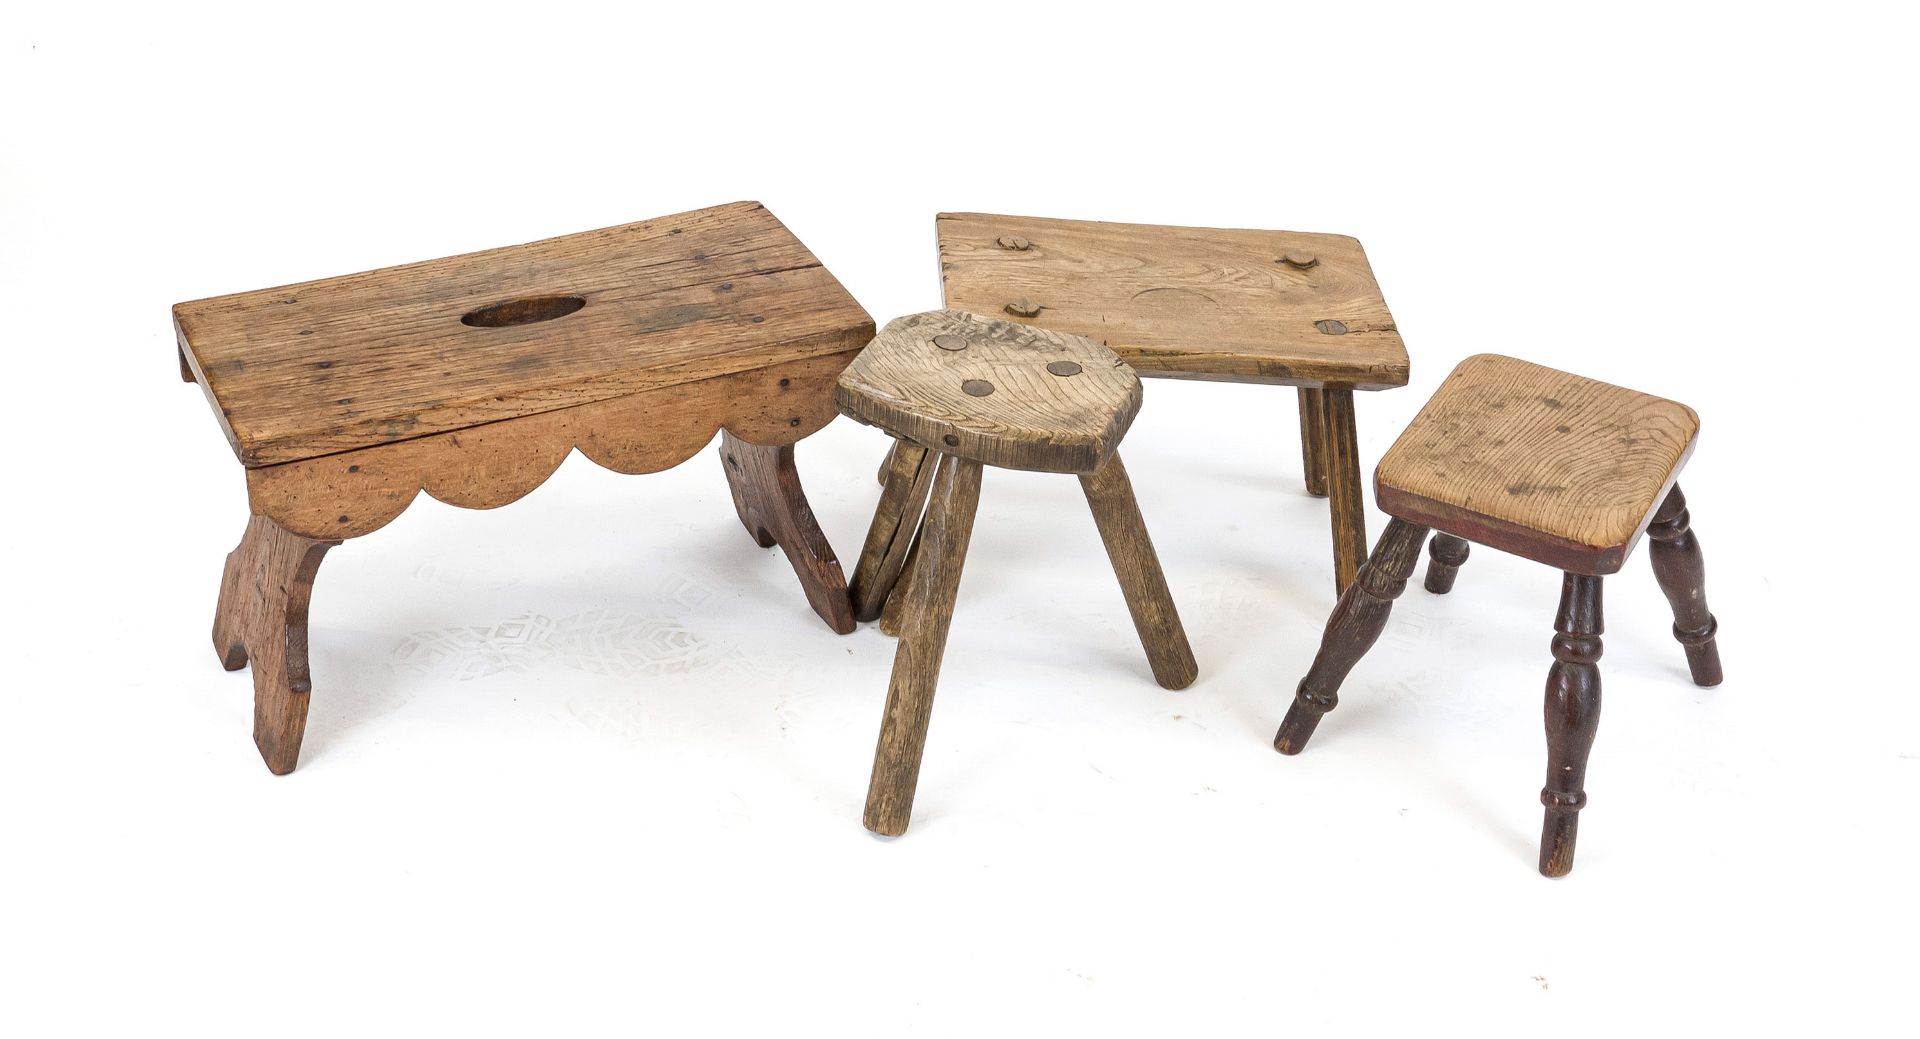 Set of four stools of different sizes, 18th/19th century, oak, h. up to 33, w. up to 50 cm